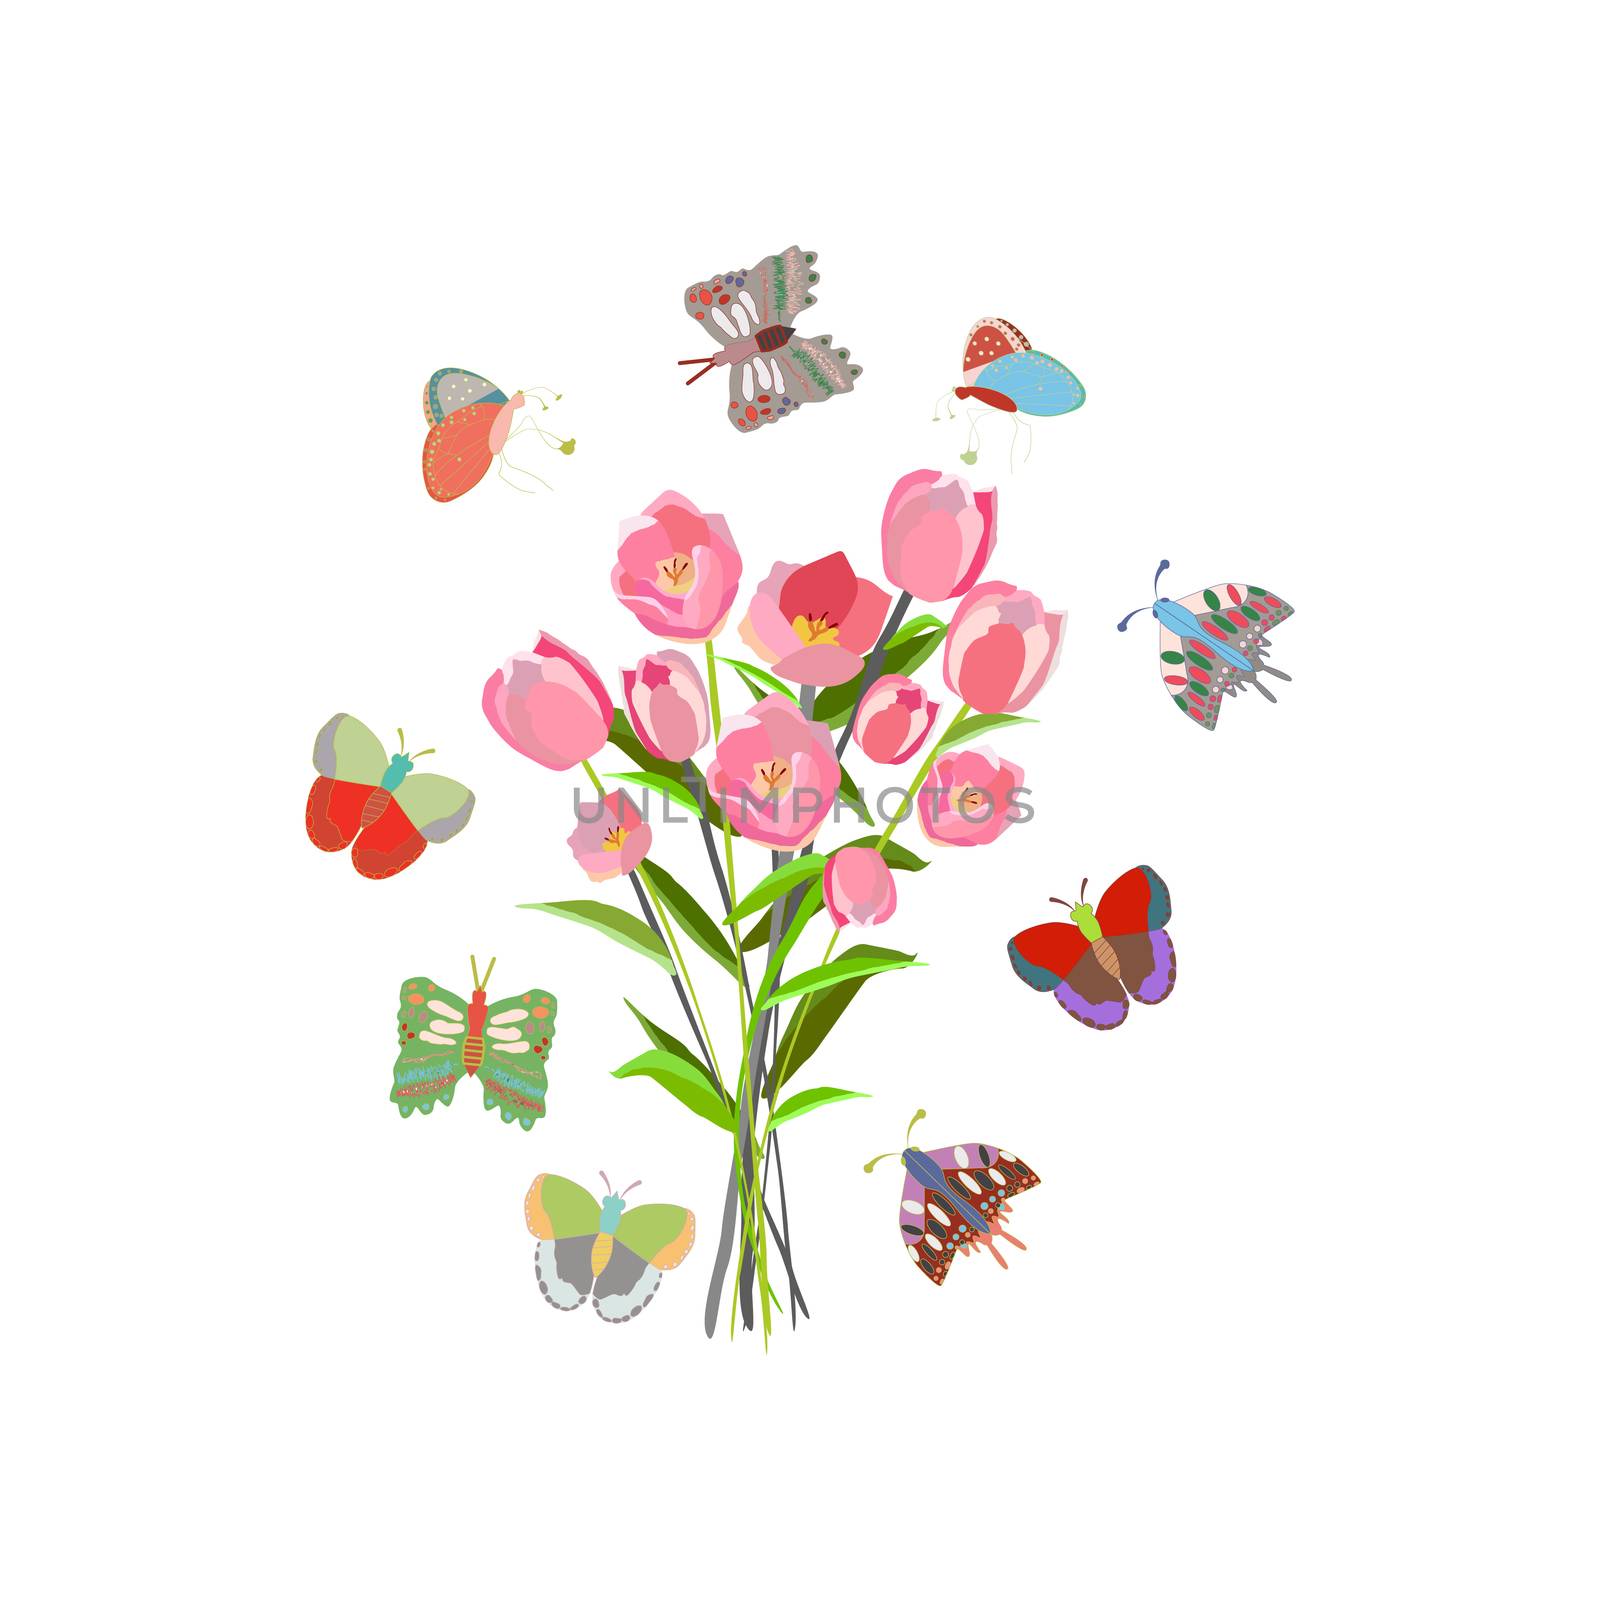 Bouquet of pink tulips with border of butterflies. Hand illustration isolated on white background. T-shirt, card, poster design element. Vector Illustration.